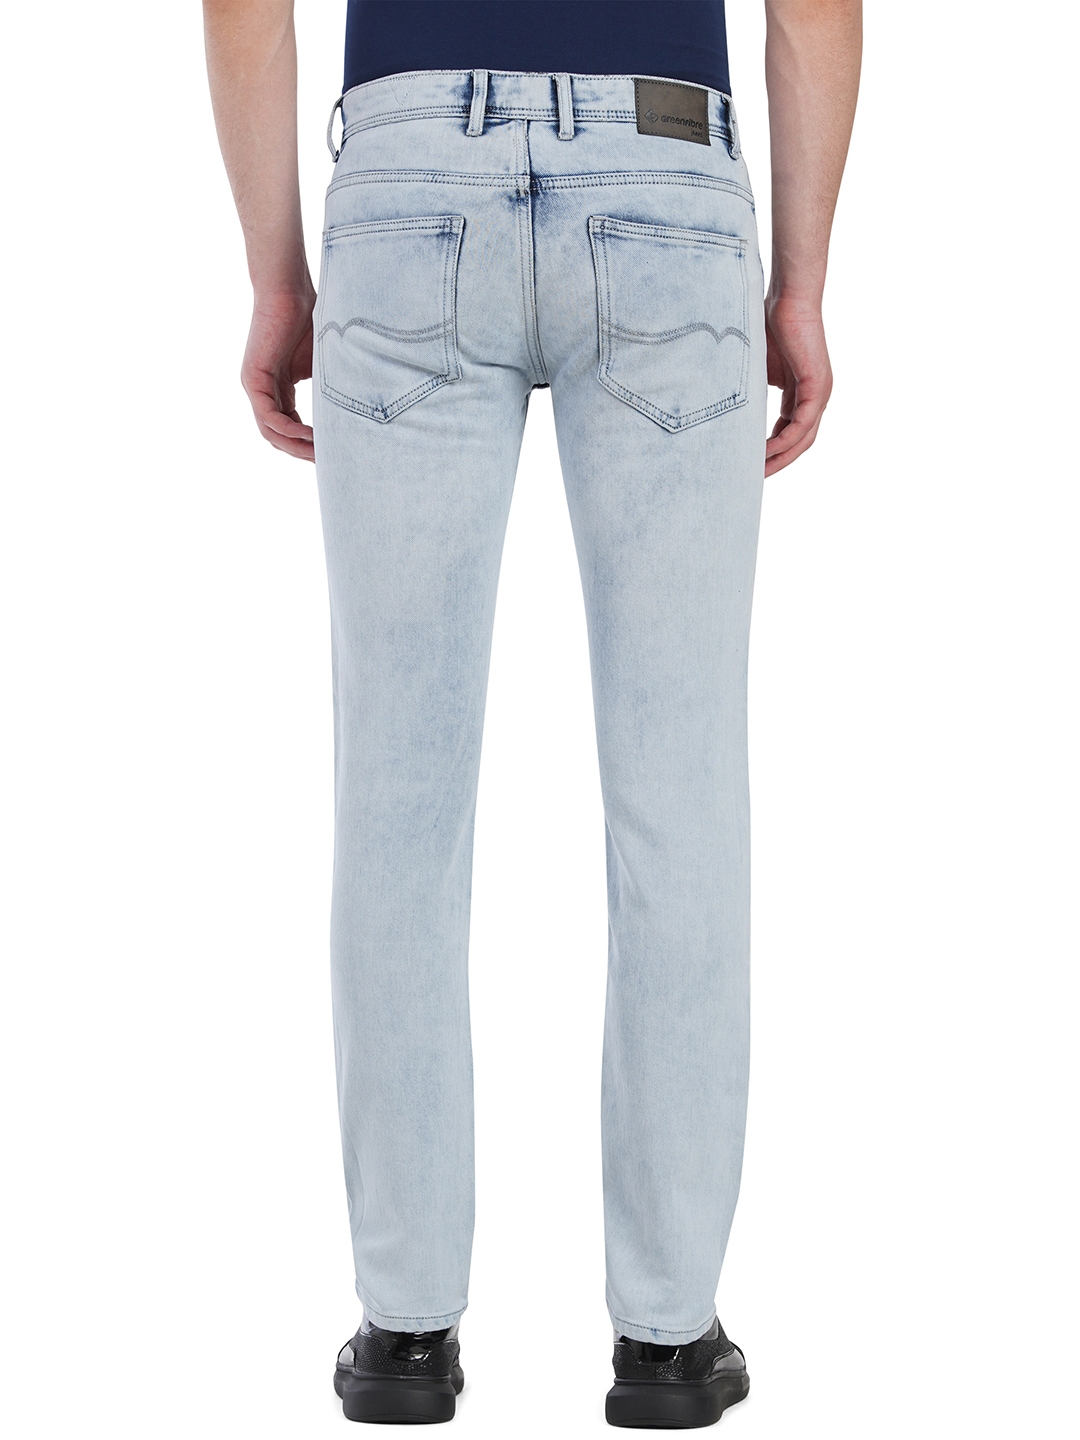 Greenfibre | Light Blue Washed Narrow Fit Jeans | Greenfibre 2